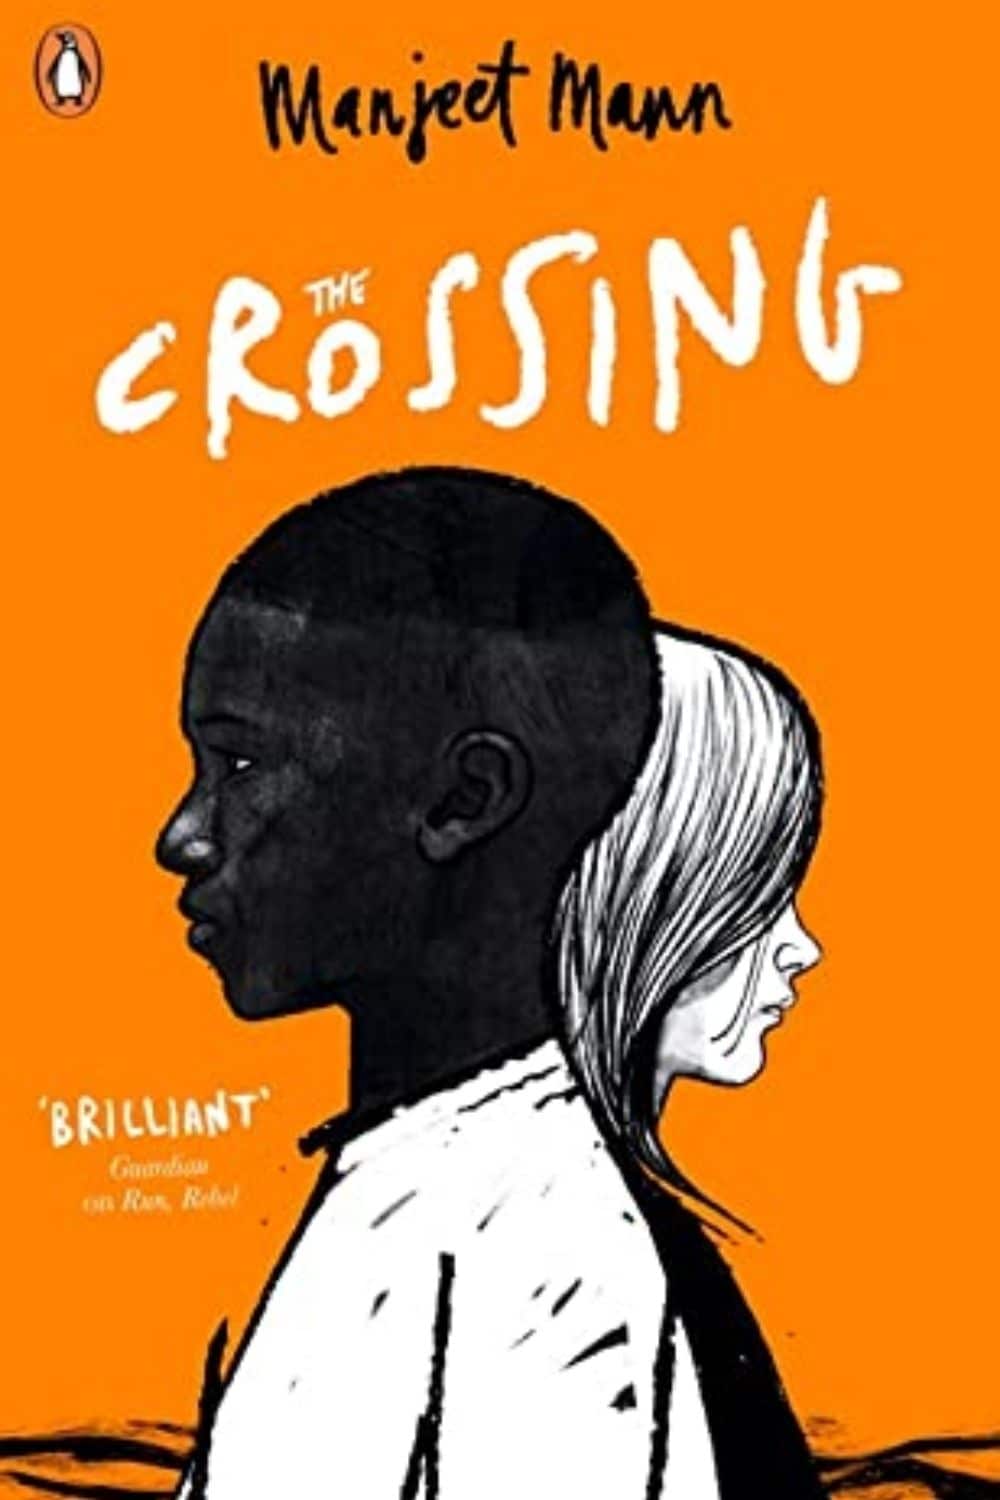 Best books my authors of India in June 2021 (The Crossing by Manjeet Mann)